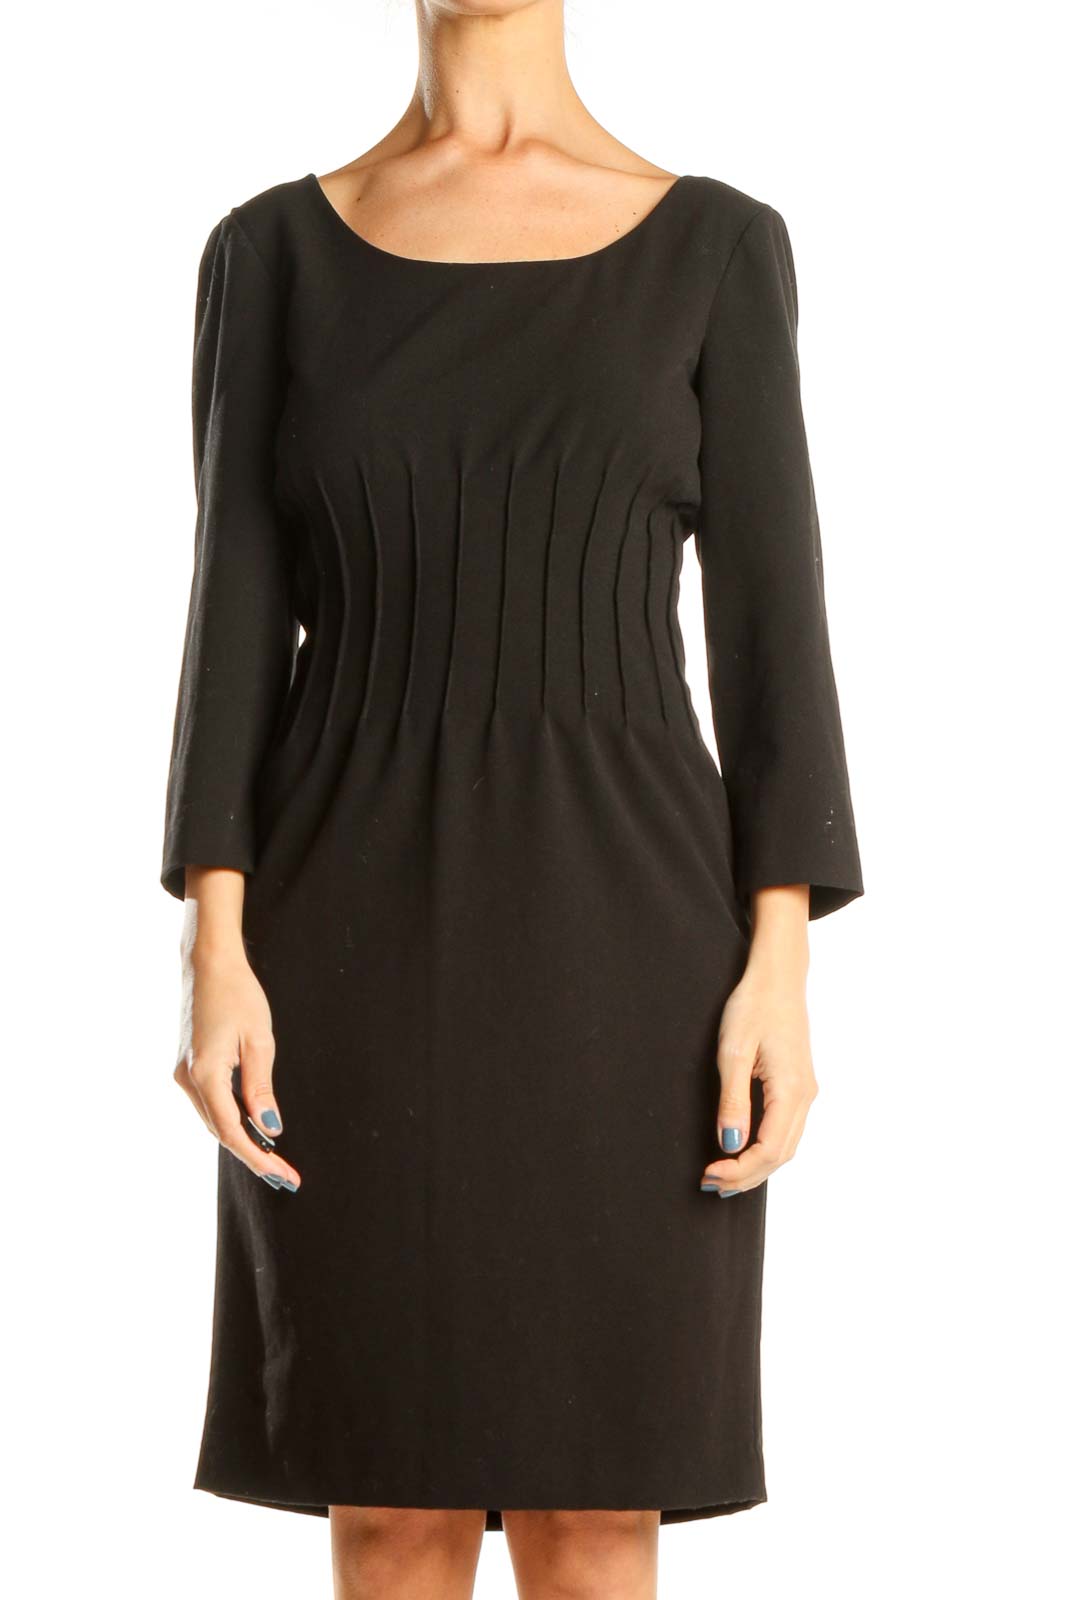 Black Work Long Sleeve Sheath Dress With Corset Detail Front